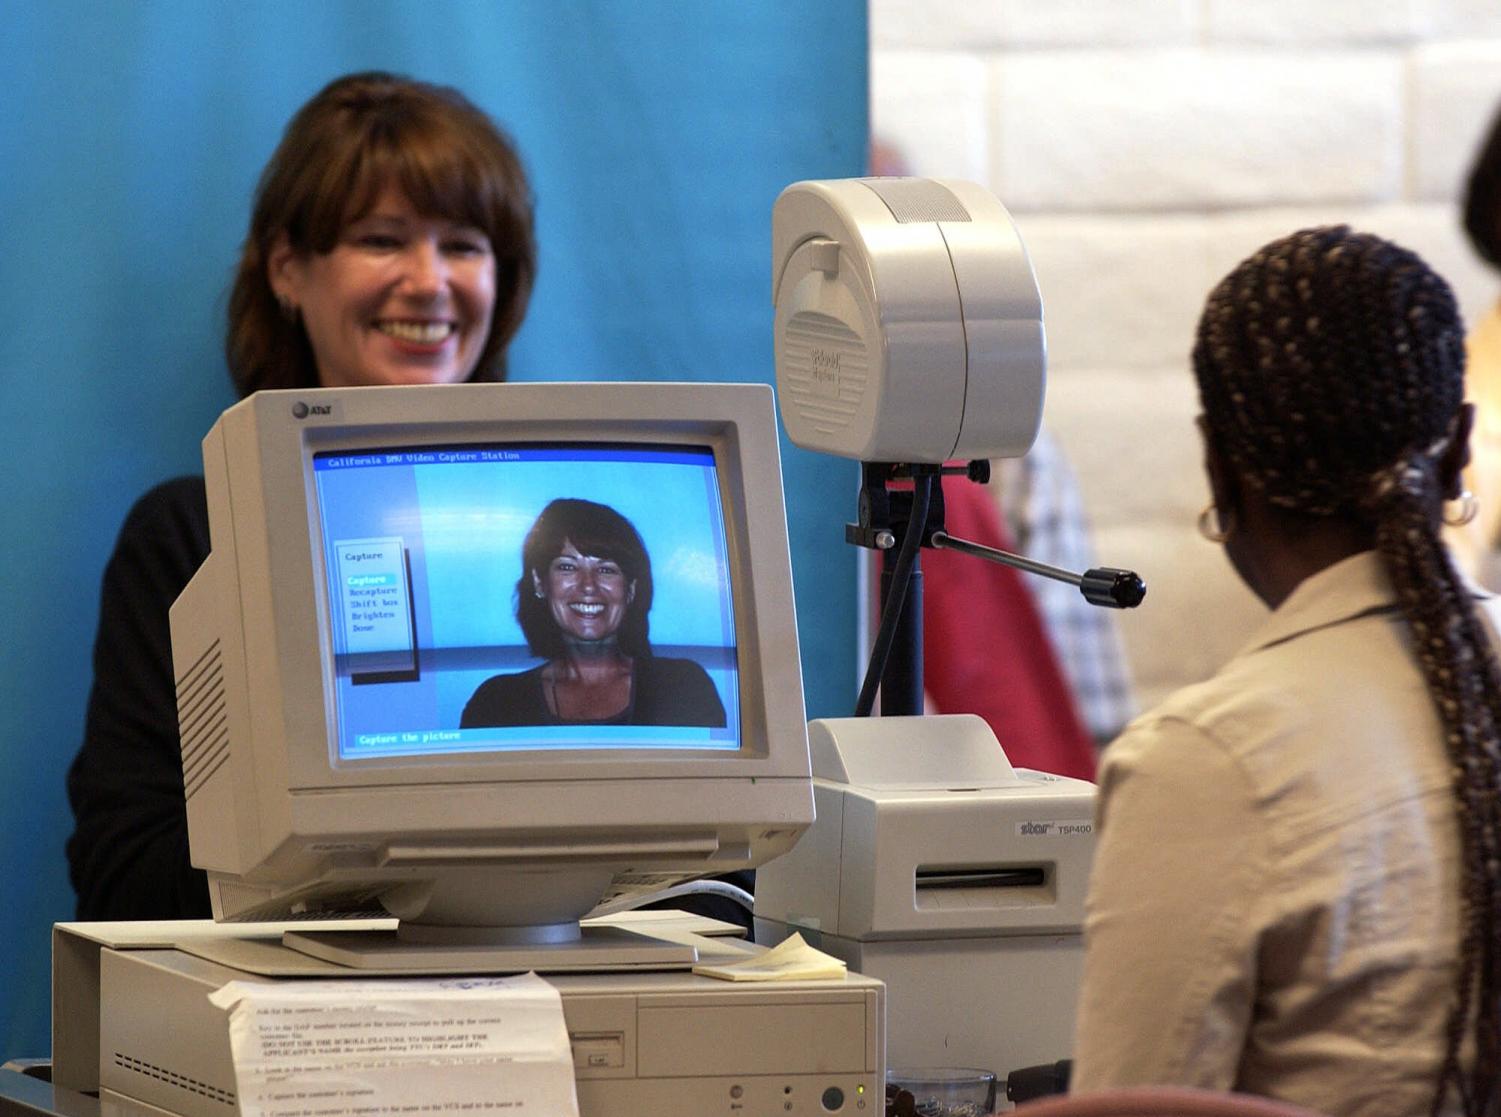 A woman has her photo taken by an unidentified DMV technician at the California Department of Motor Vehicles office in San Diego in this 2001 file photo.